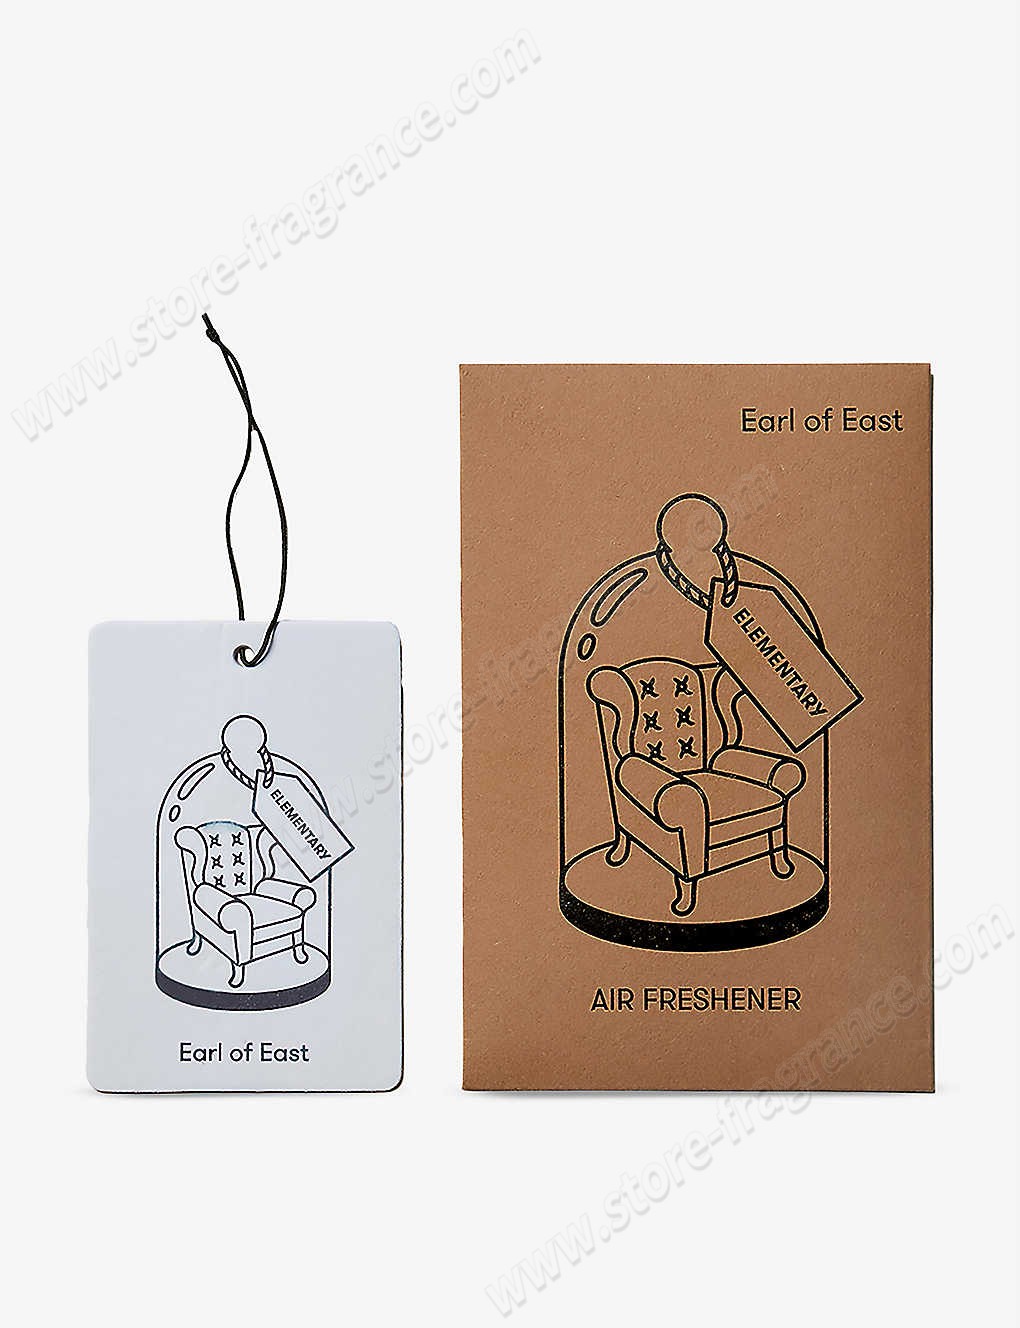 EARL OF EAST/Elementary air freshener Limit Offer - -0